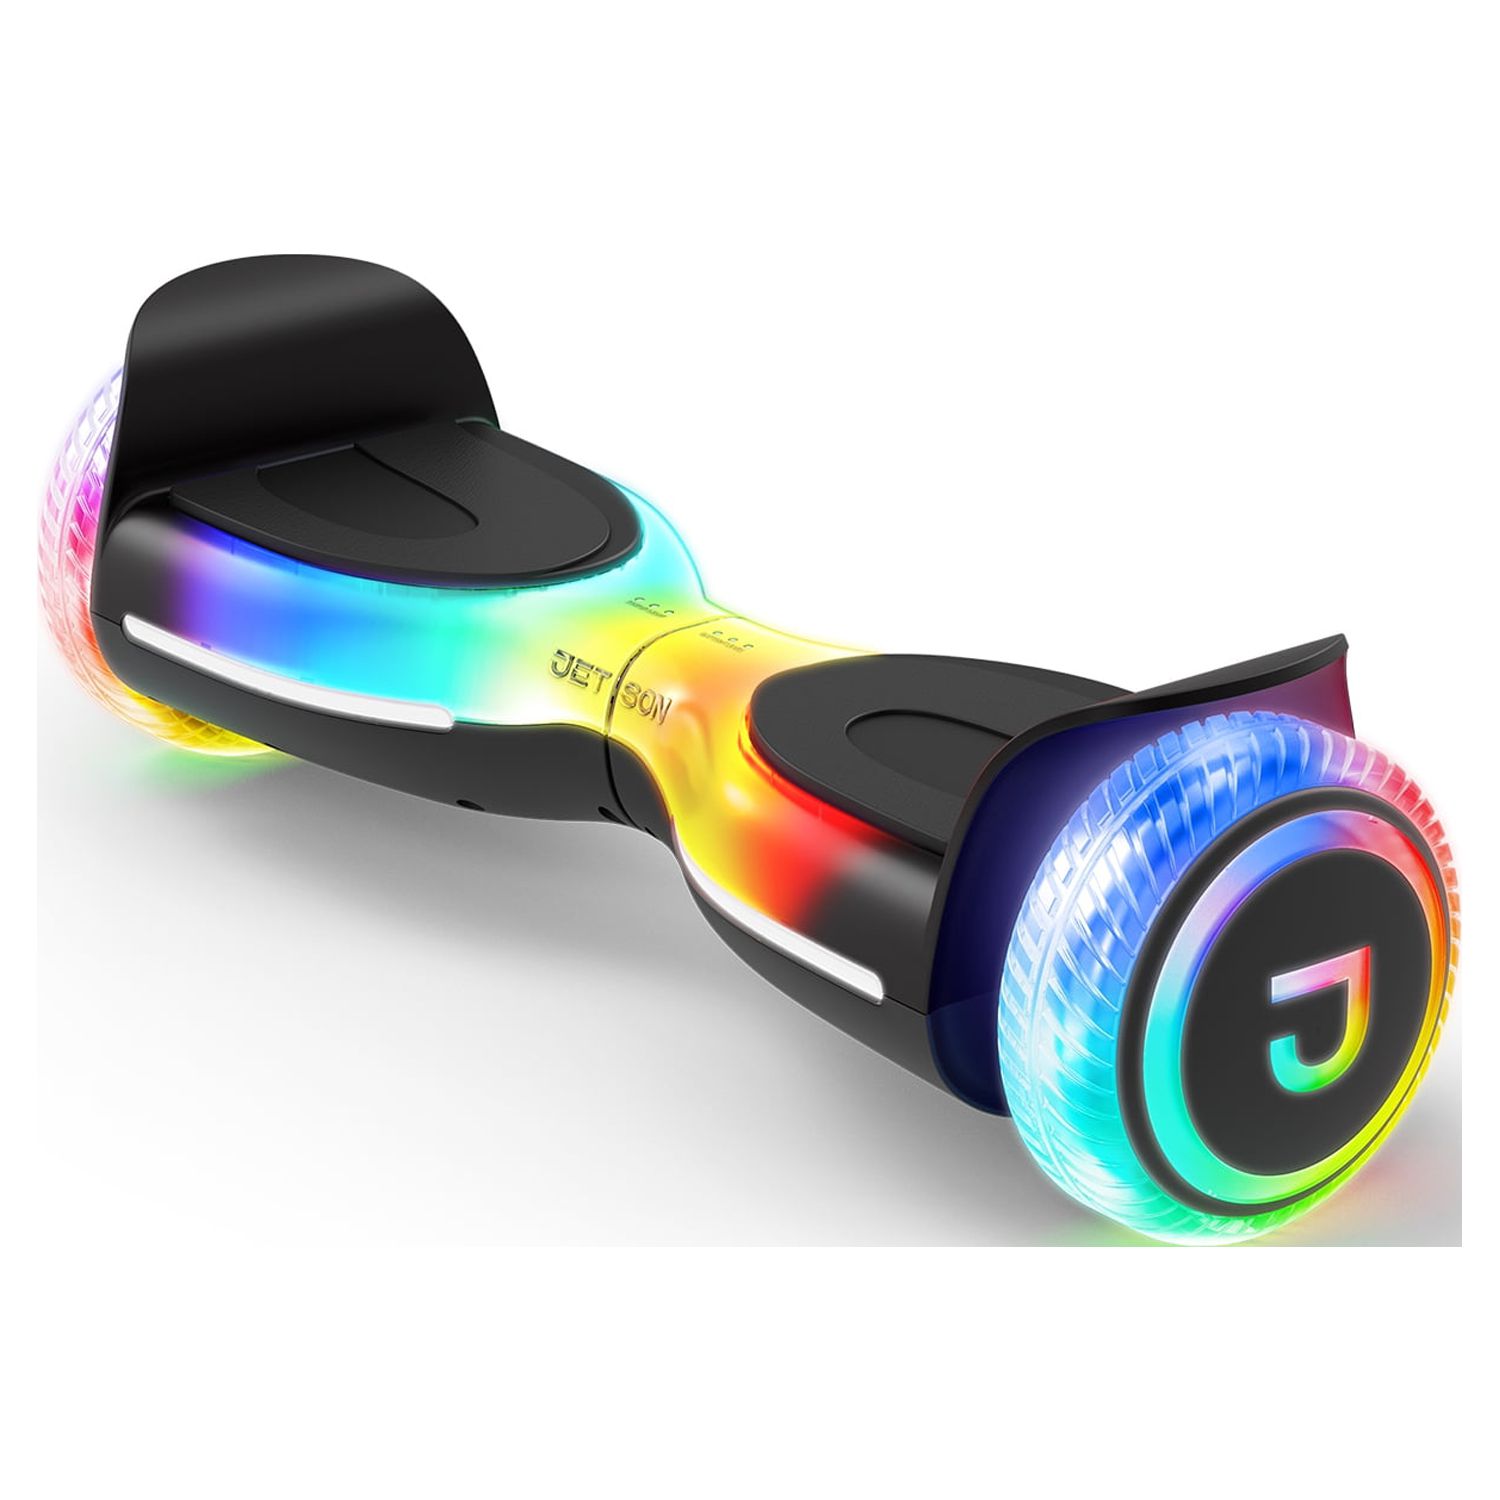 Jetson Hali X Luminous Extreme Terrain Dynamic Bluetooth Speakers Hoverboard, Black - image 1 of 11